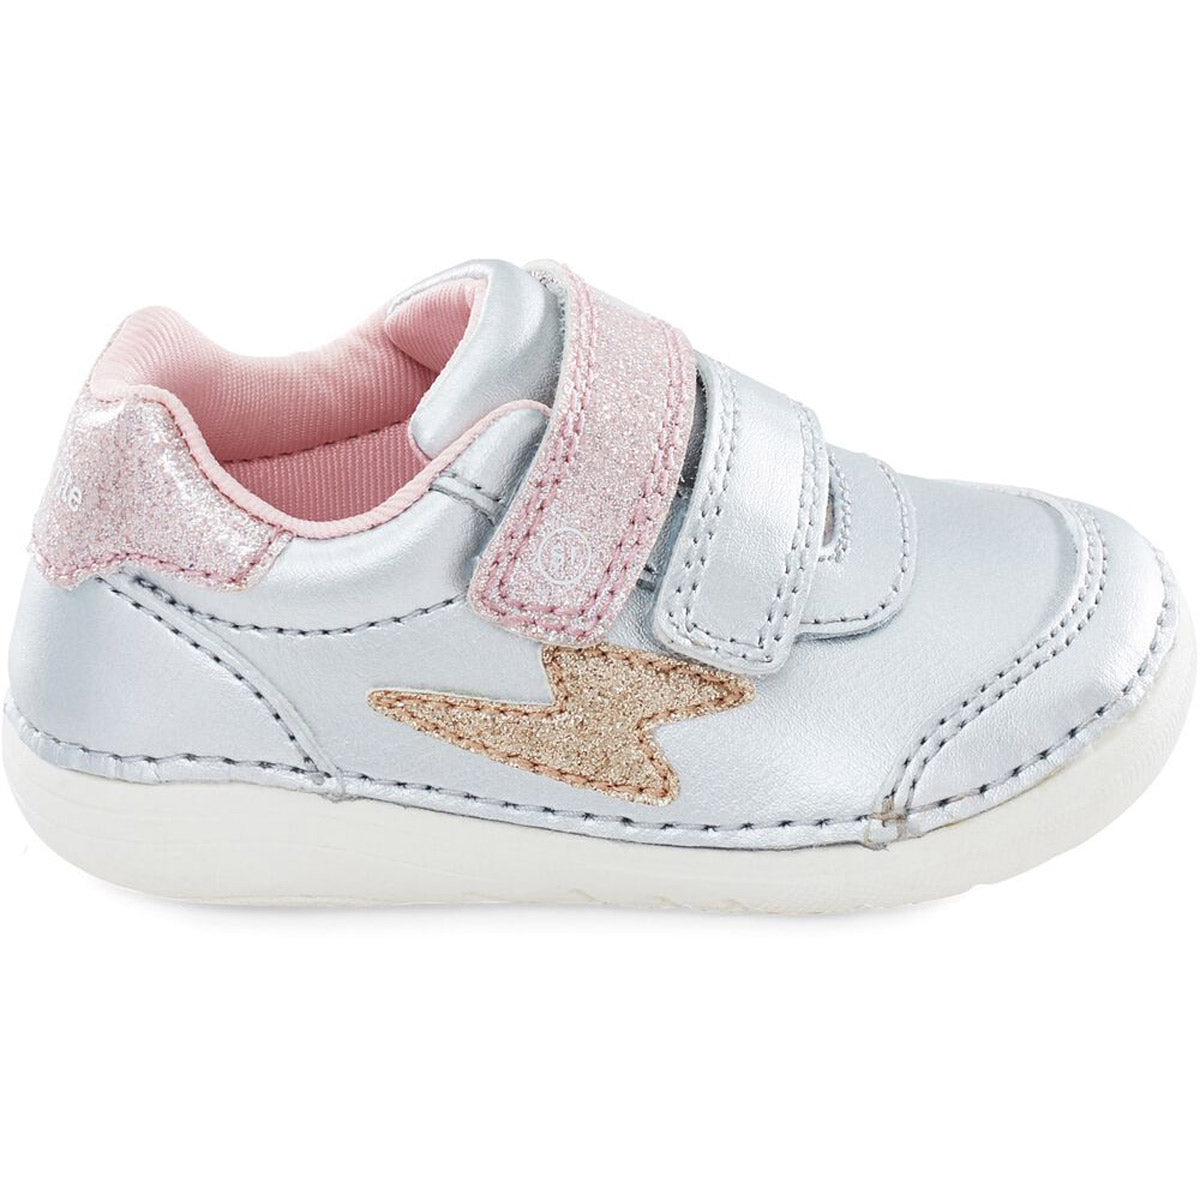 A child&#39;s Stride Rite SM Kennedy Silver Multi sneaker with an adjustable double hook and loop closure and pink accents.